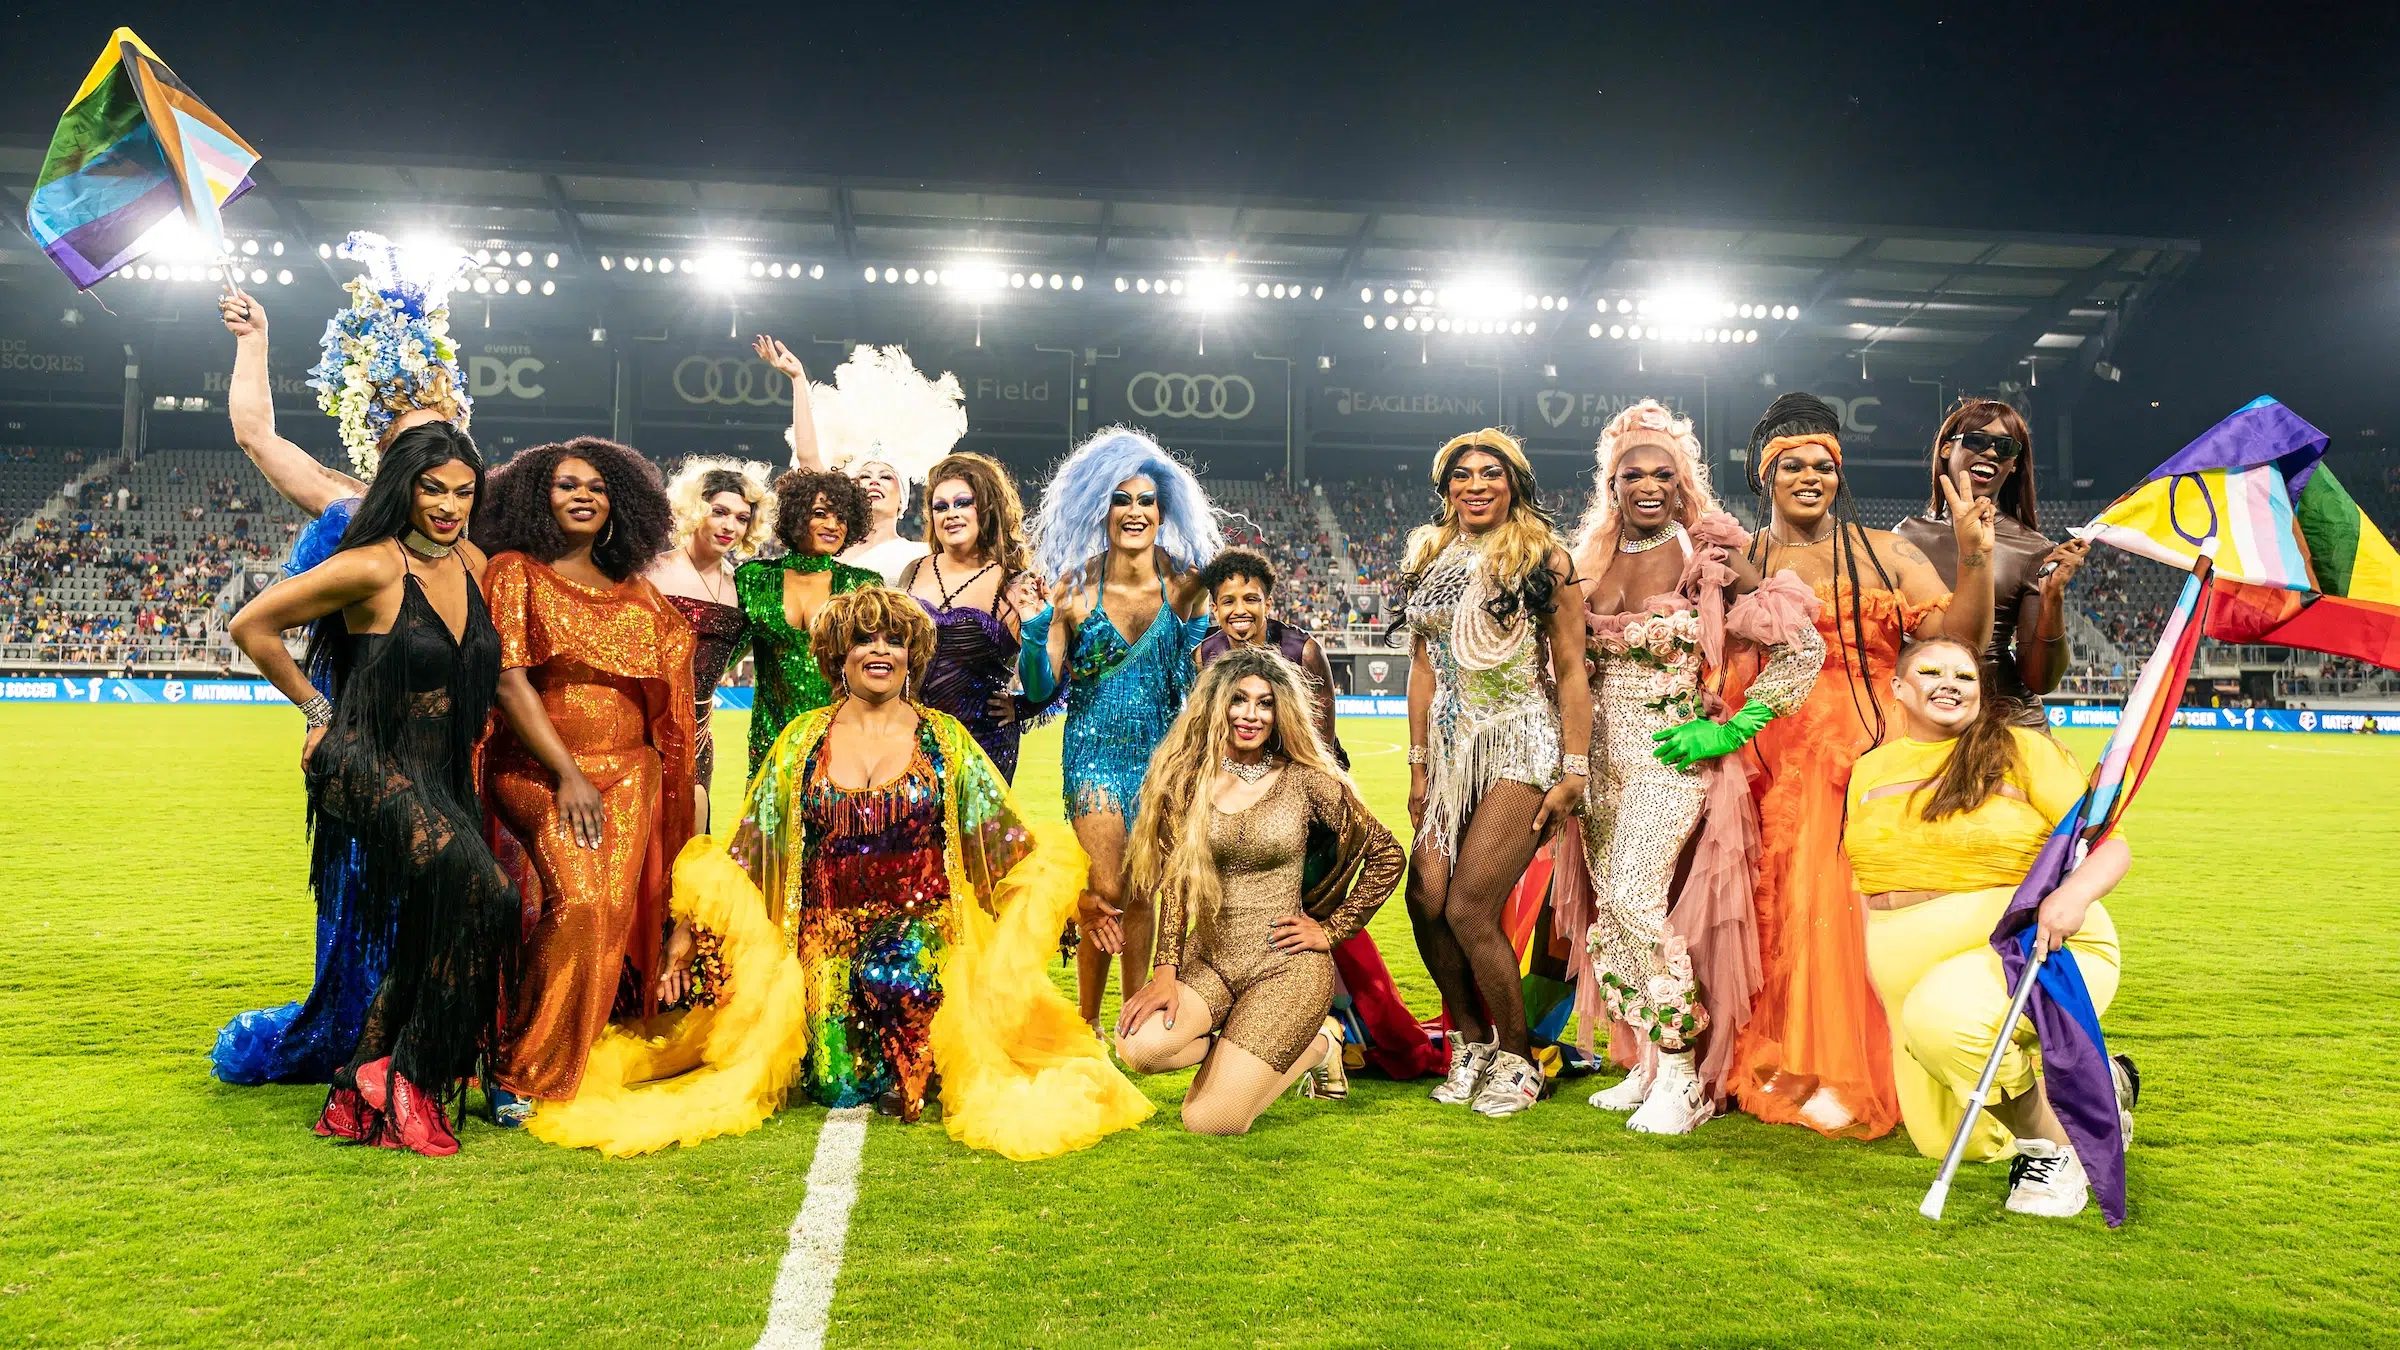 More than a dozen drag queens and kings pose for a photo on Audi Field after performing at halftime of the Spirt vs. Racing Louisville soccer game.